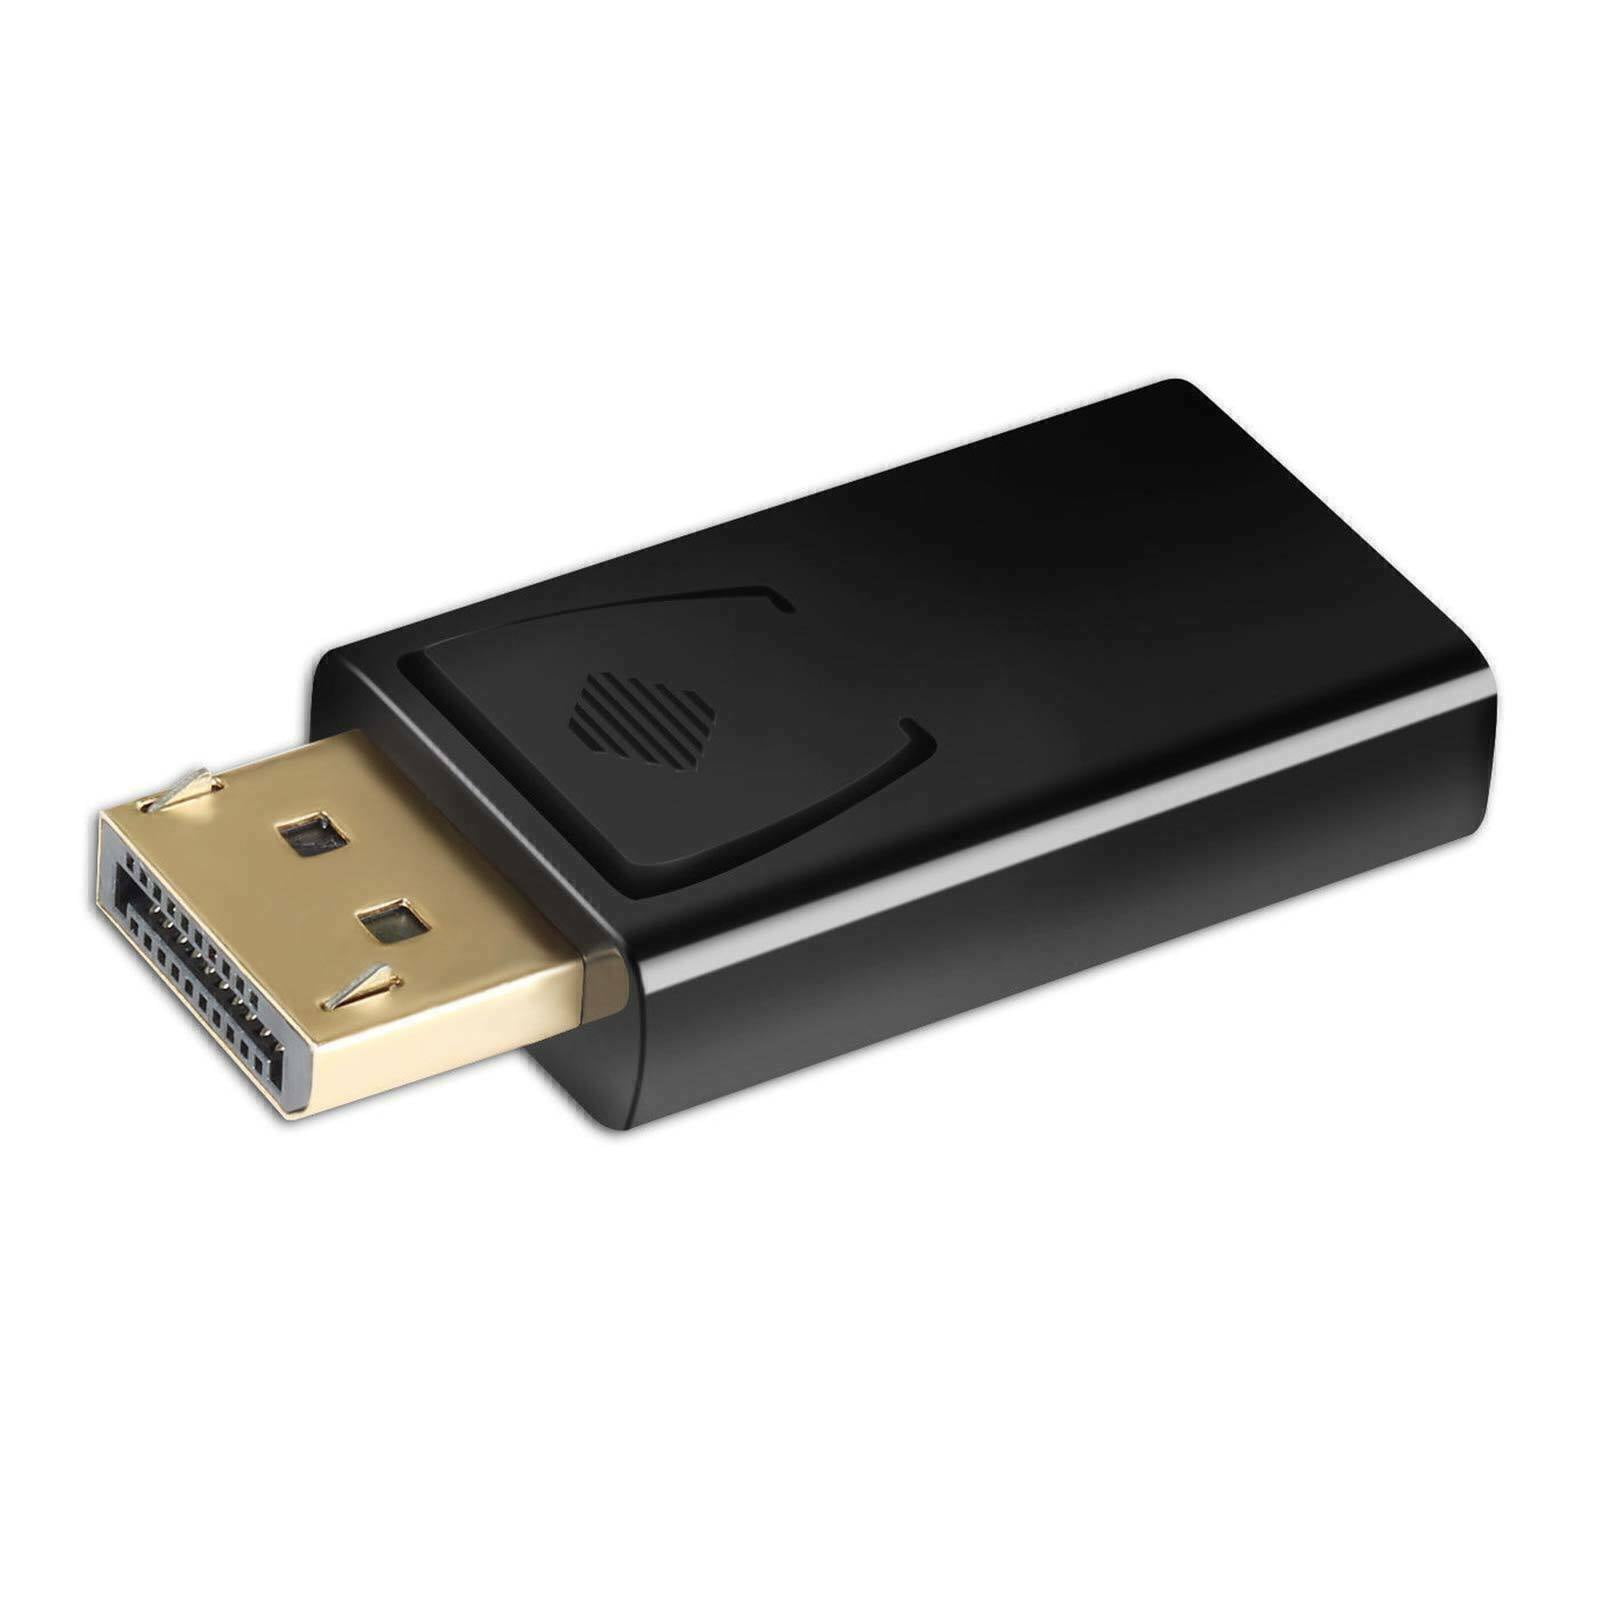 Display DP Male to HDMI Female Adapter Converter for HDTV PC in Multimedia